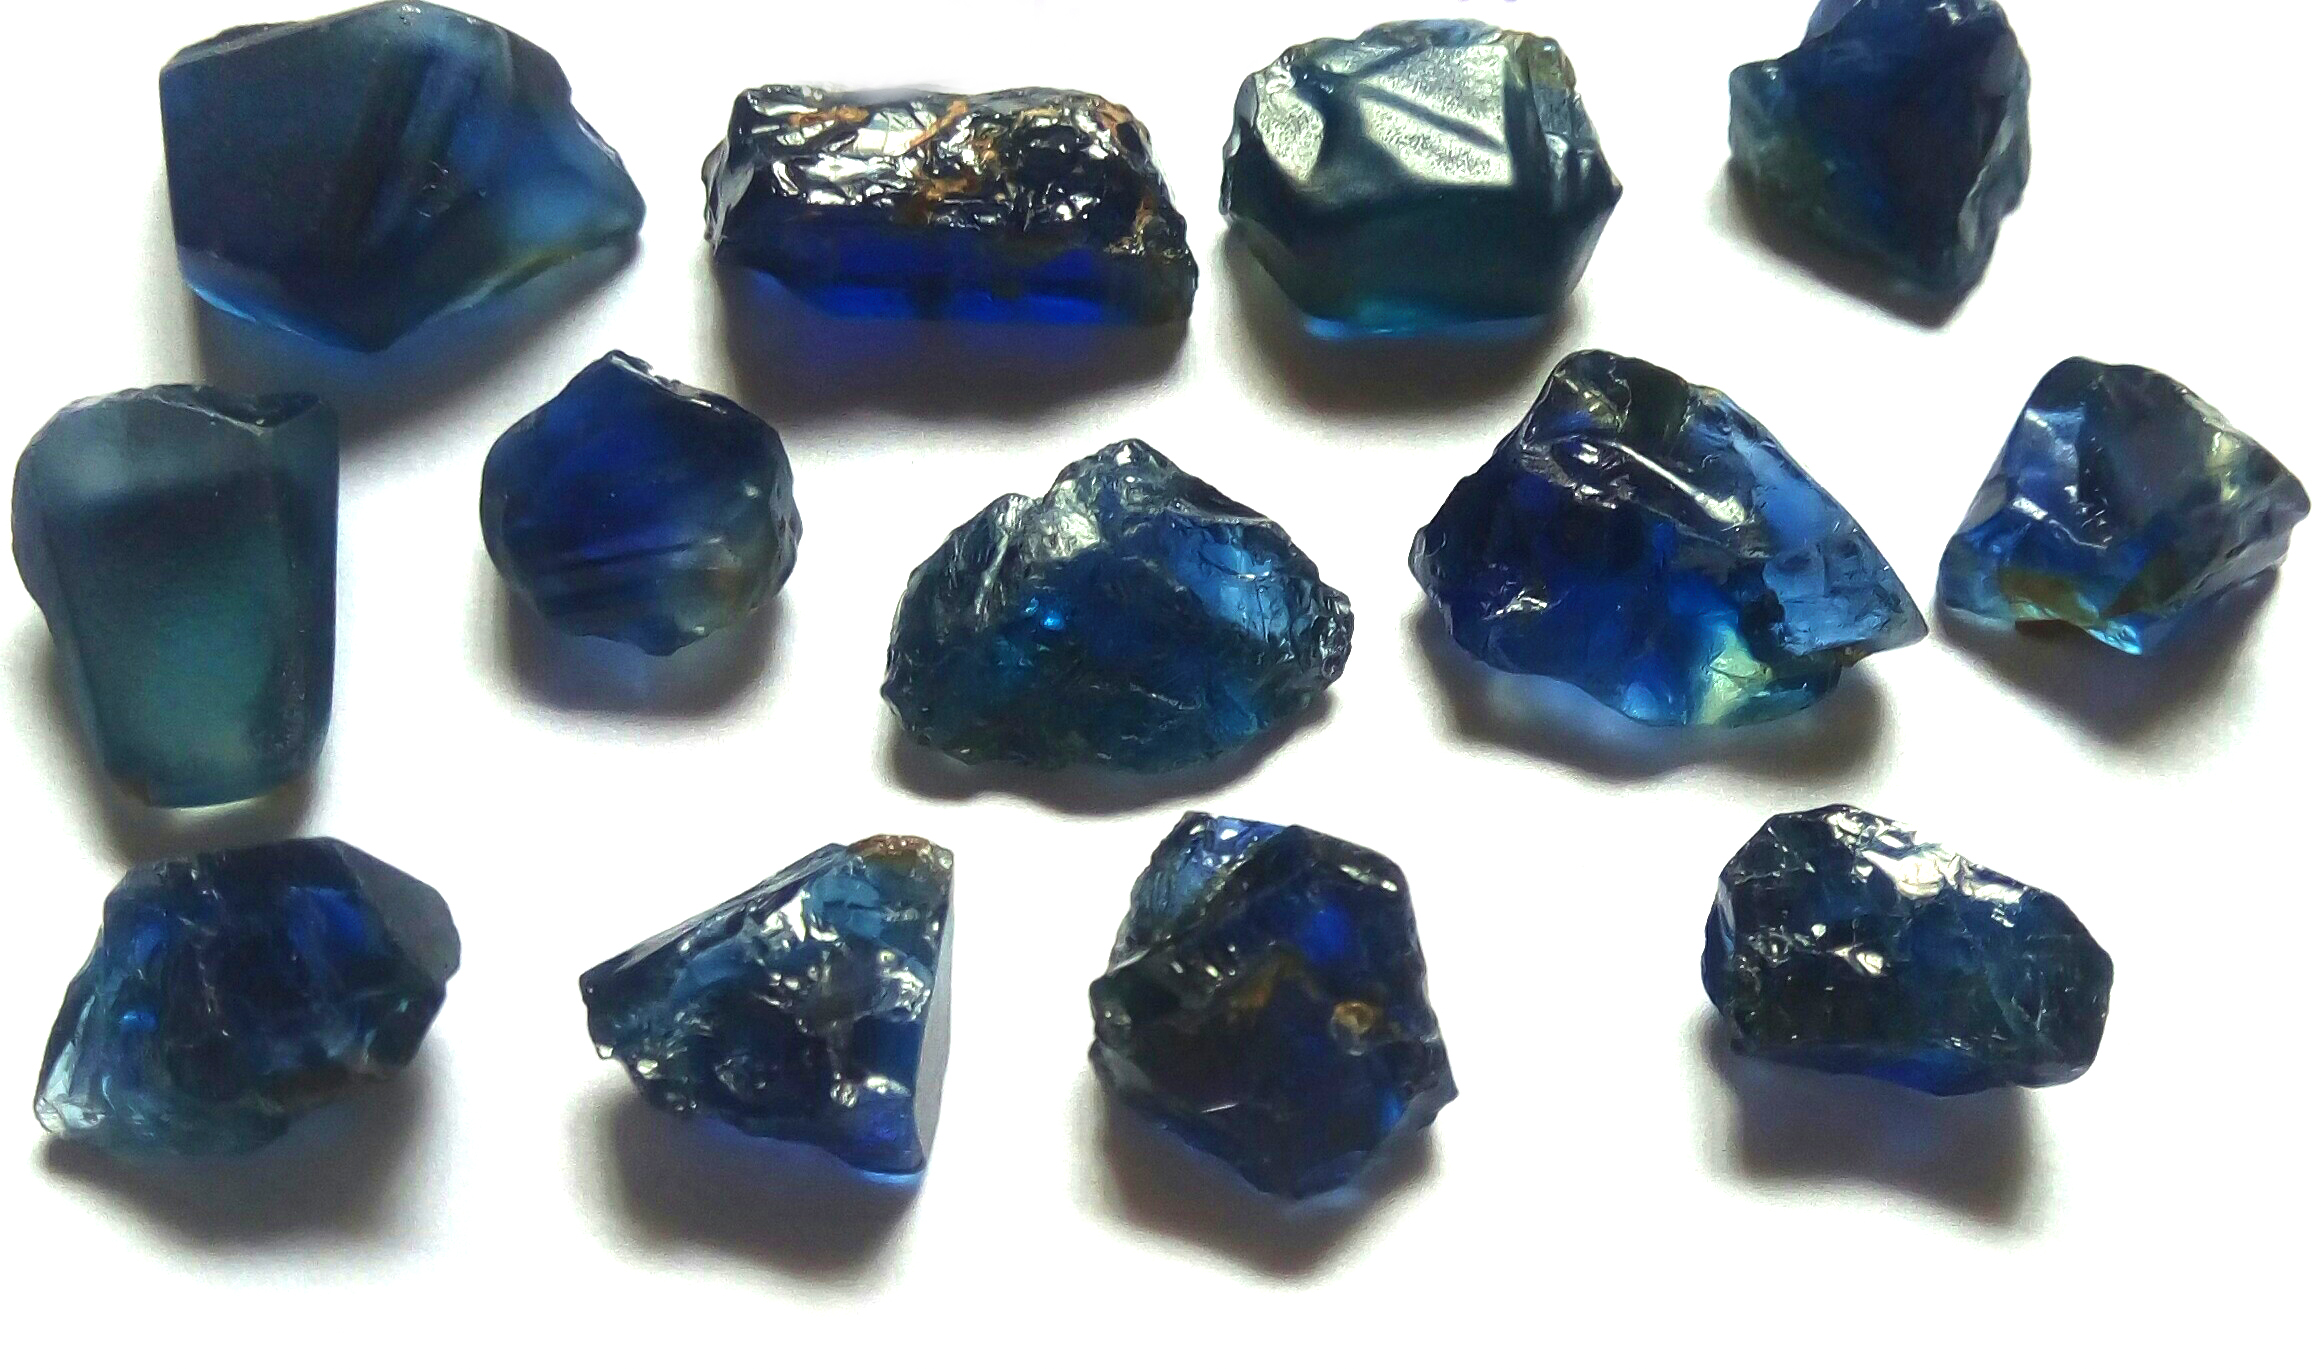 Sapphire Meanings, Properties and Uses